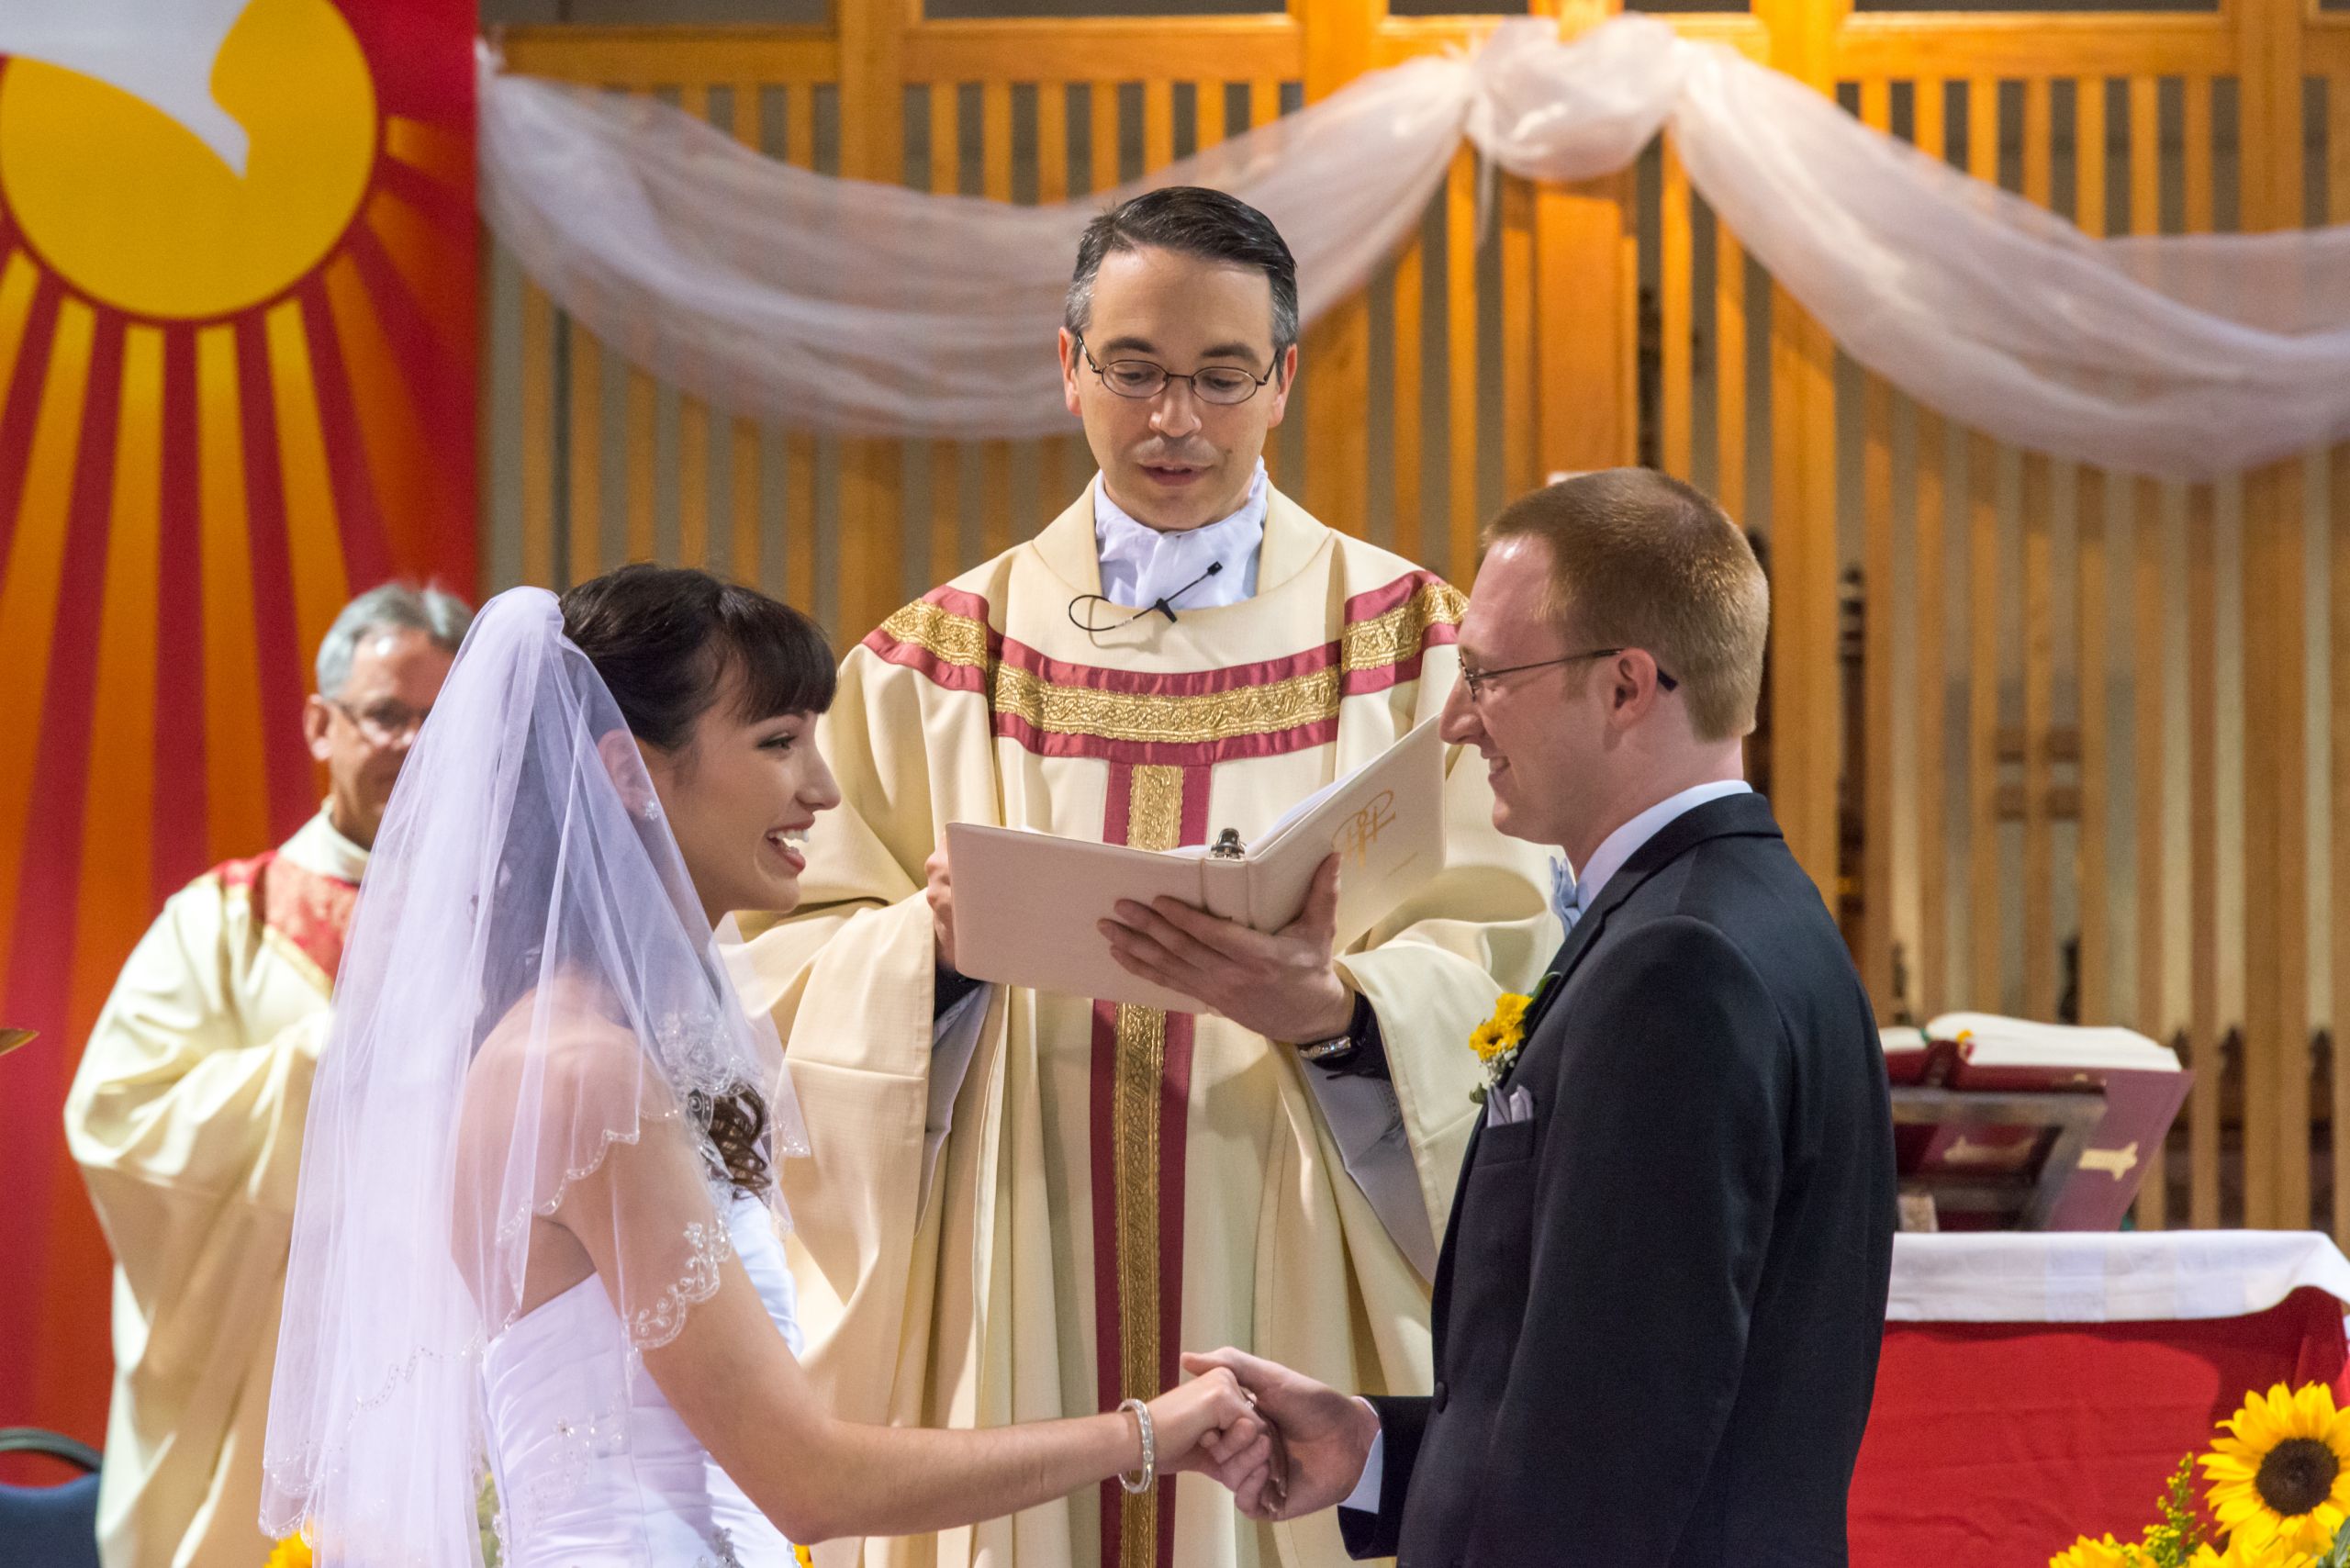 Catholic Wedding Vows
 The Beauty of Catholic Wedding Vows and the Nuptial Mass